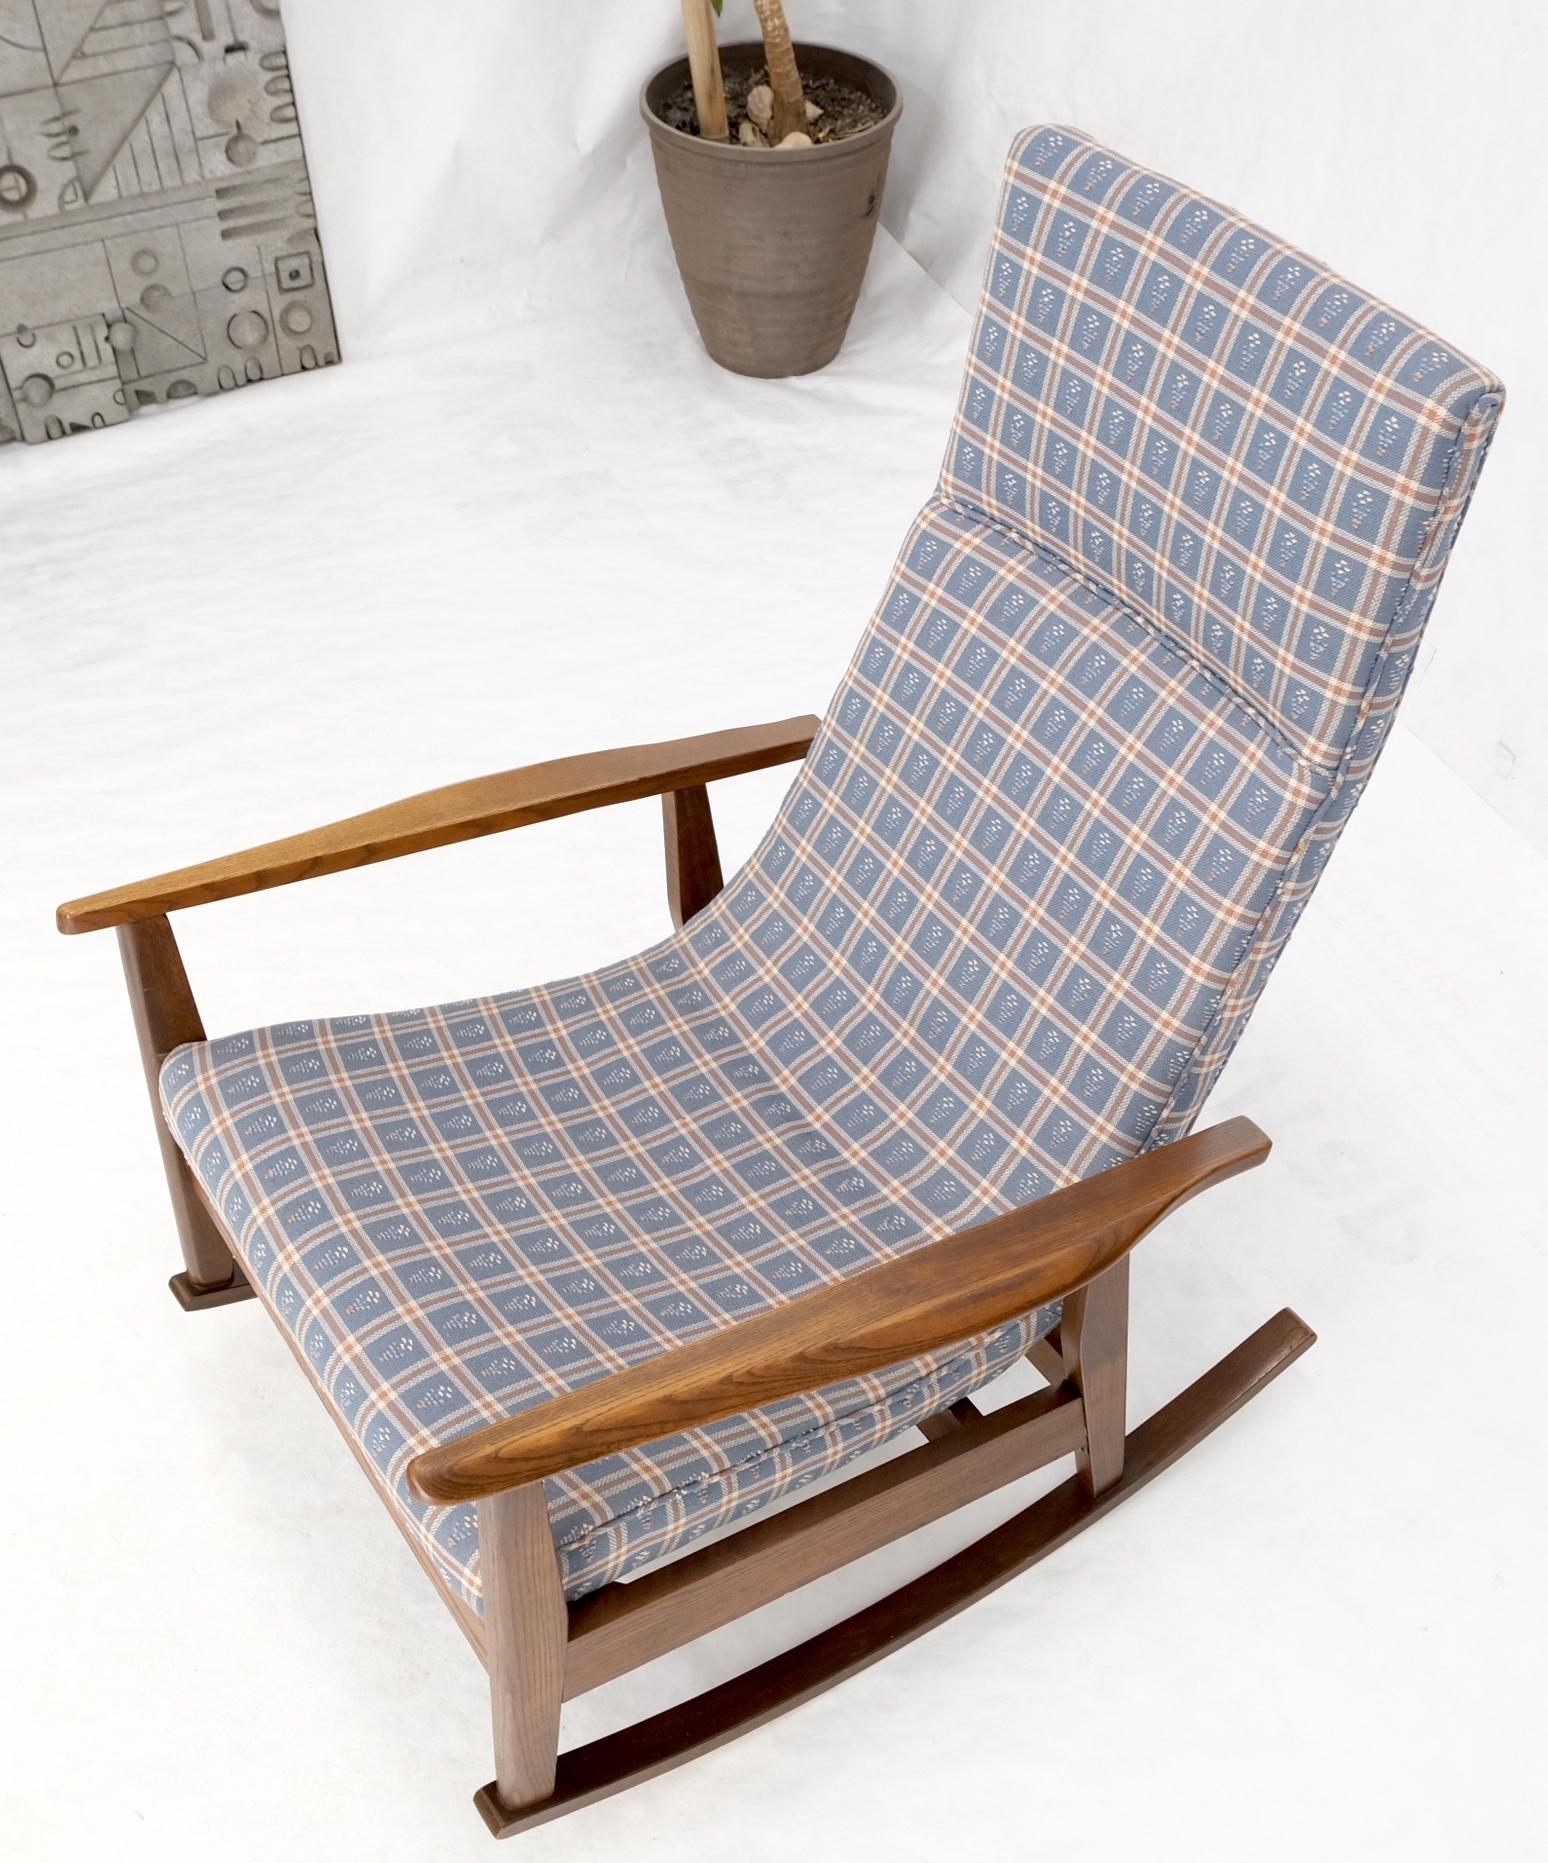 Danish Mid-Century Modern Wool Upholstery Tall Back Rocking Lounge Chair For Sale 6